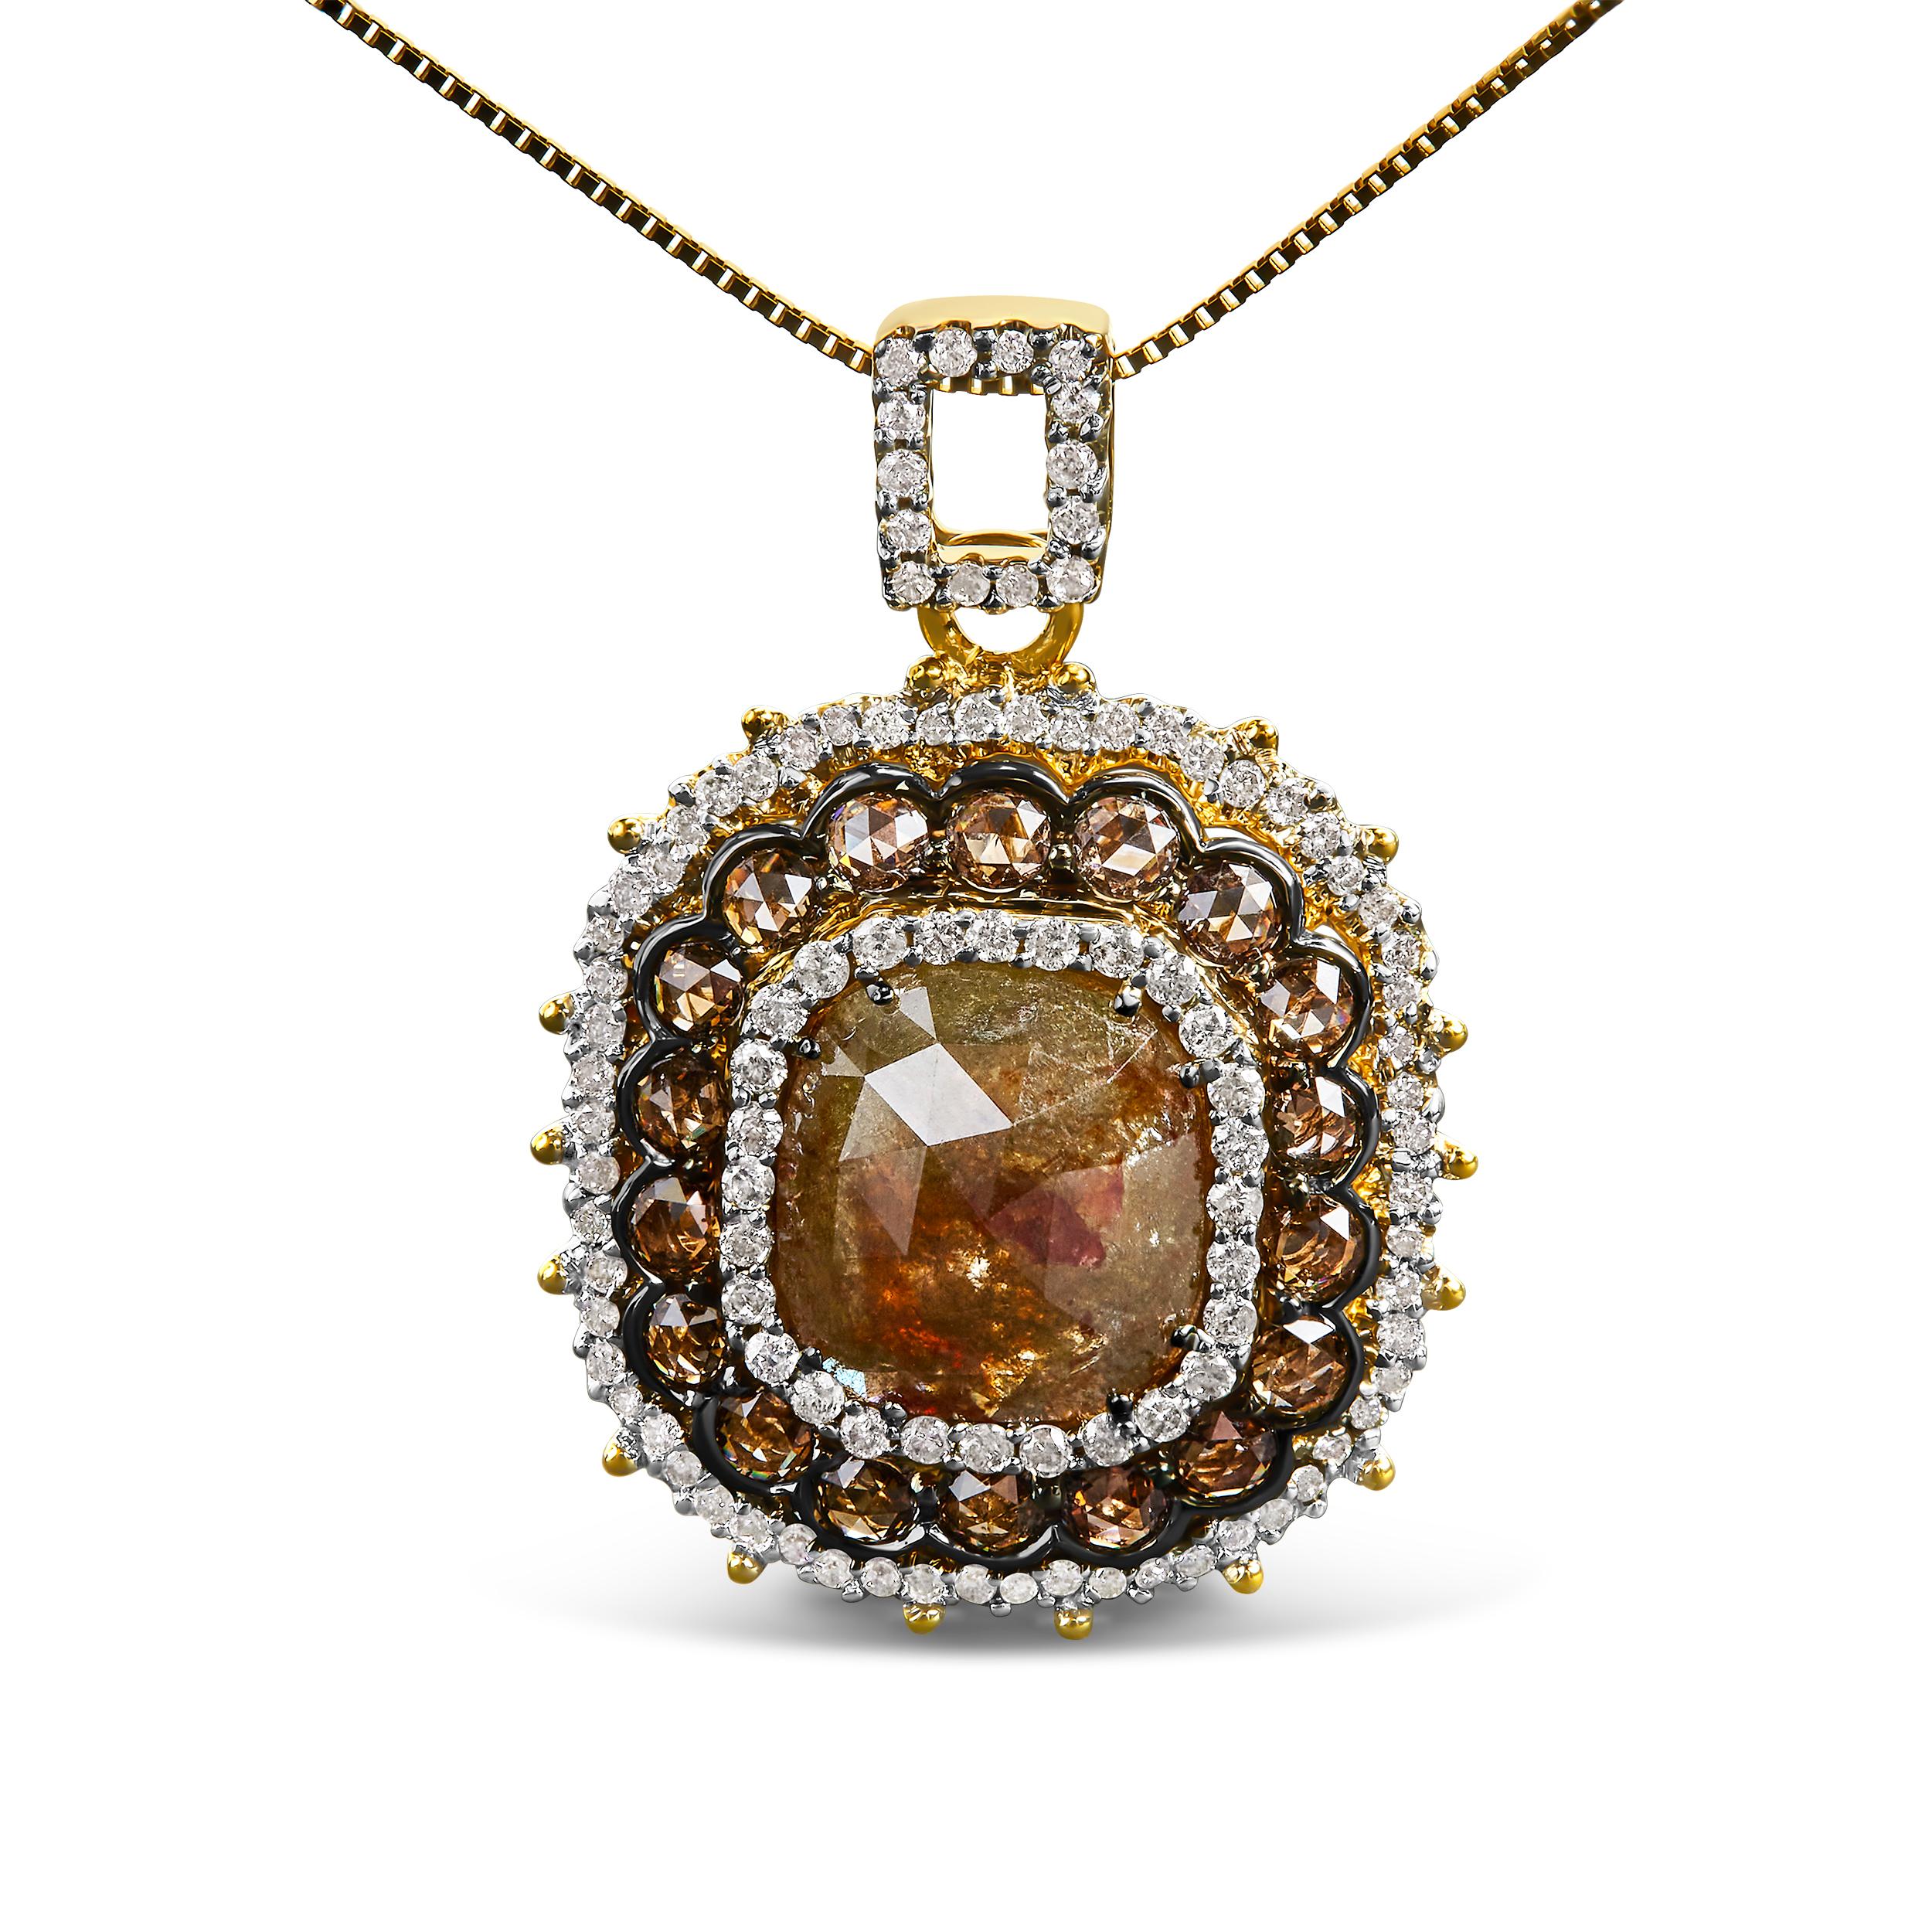 Introducing an exquisite masterpiece that will captivate your heart and elevate your style. This 14K Yellow Gold Pendant Necklace boasts a magnificent 4 1/5 Cttw Fancy Color Rose Cut Diamond Cushion Shaped Triple Halo design. With its 121 dazzling